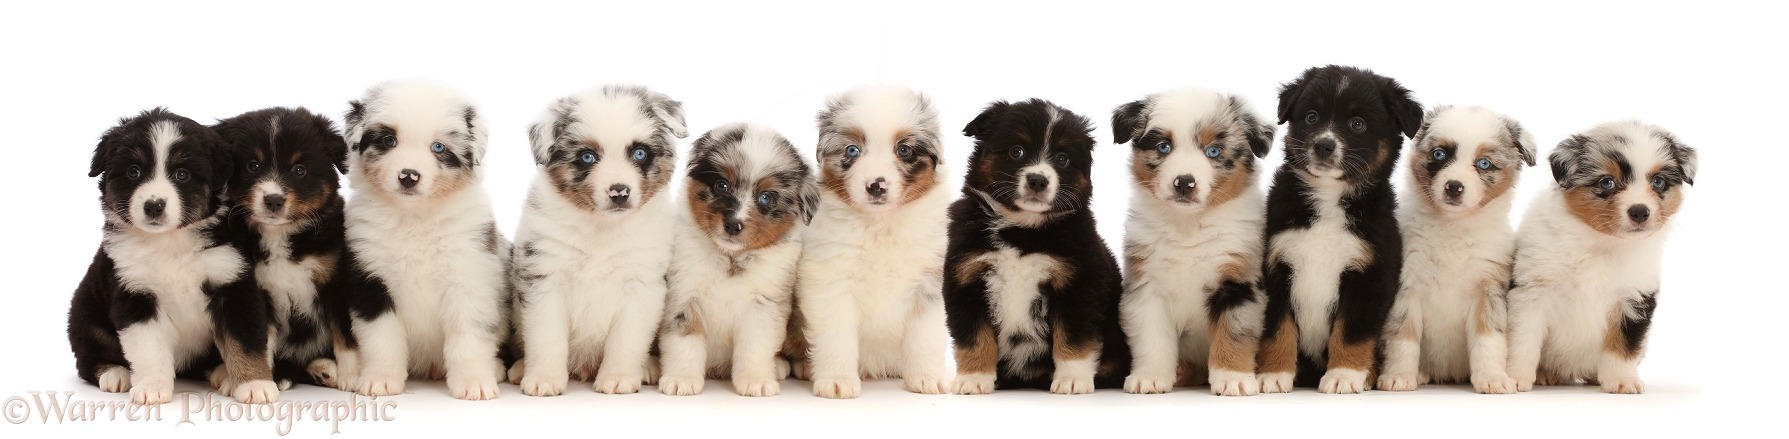 Eleven Miniature American Shepherd puppies, 7 weeks old, sitting in a row, white background